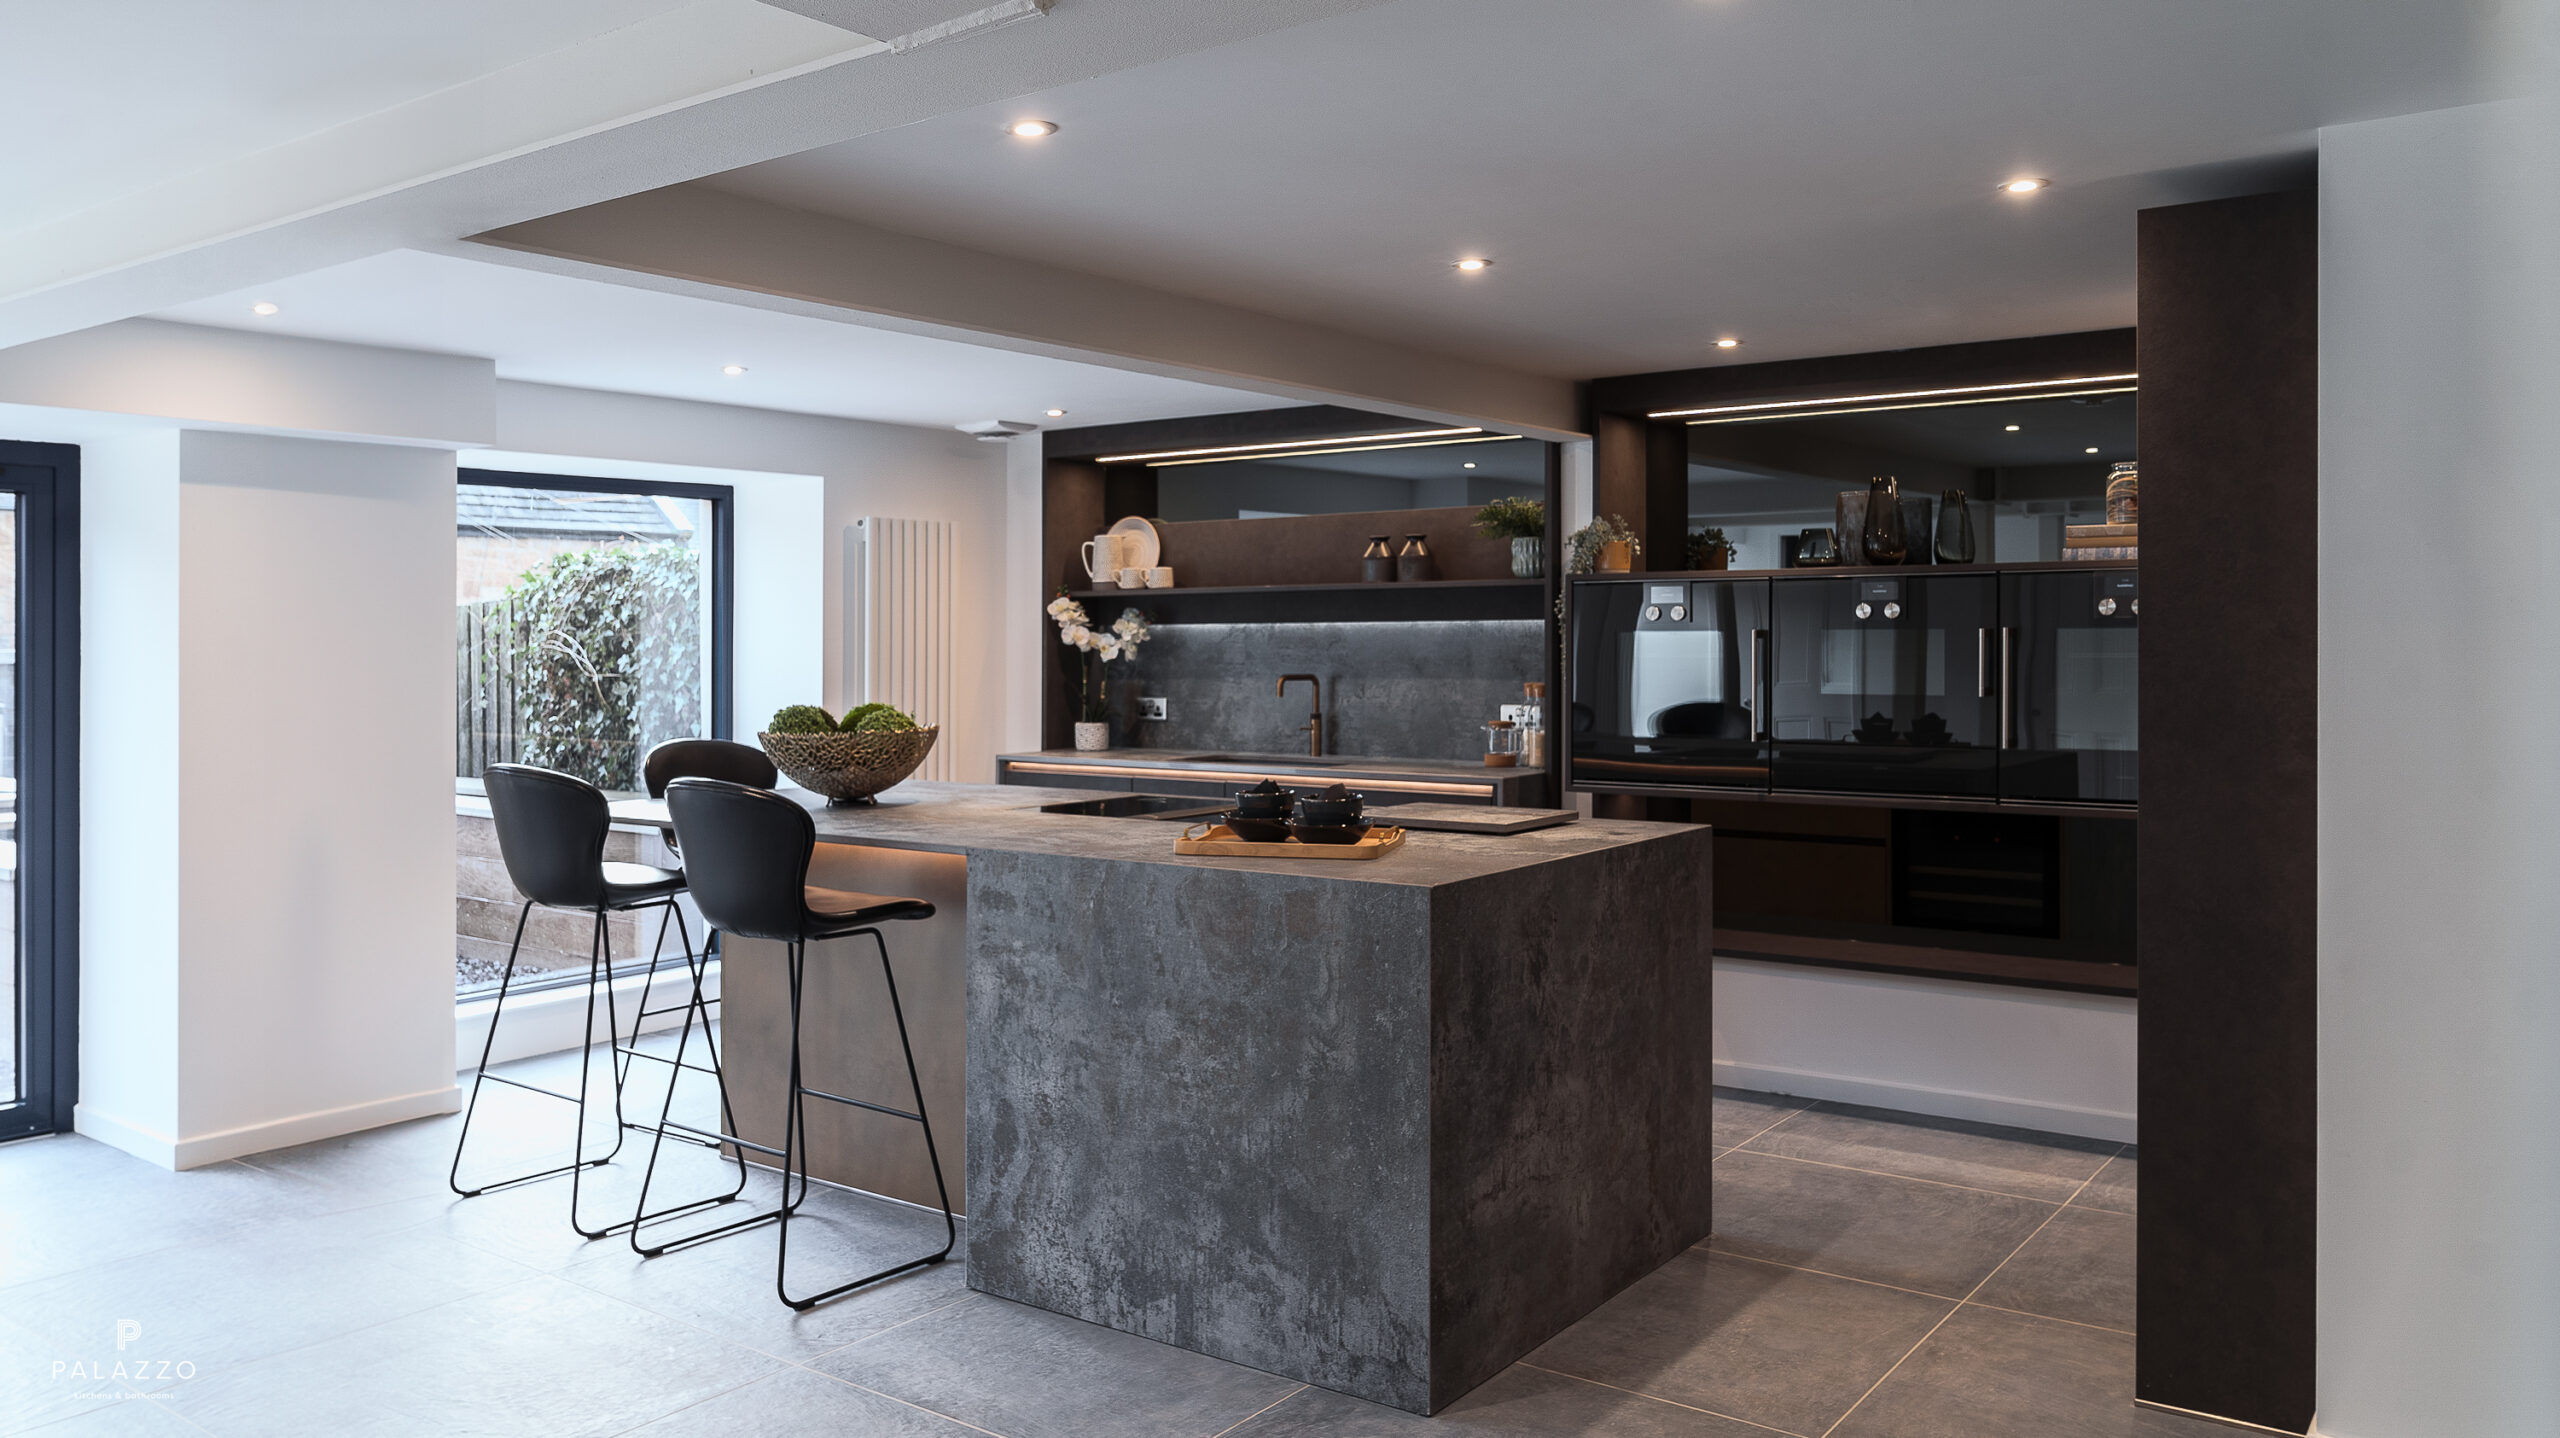 Image 5: Take a look at this Glasgow kitchen design